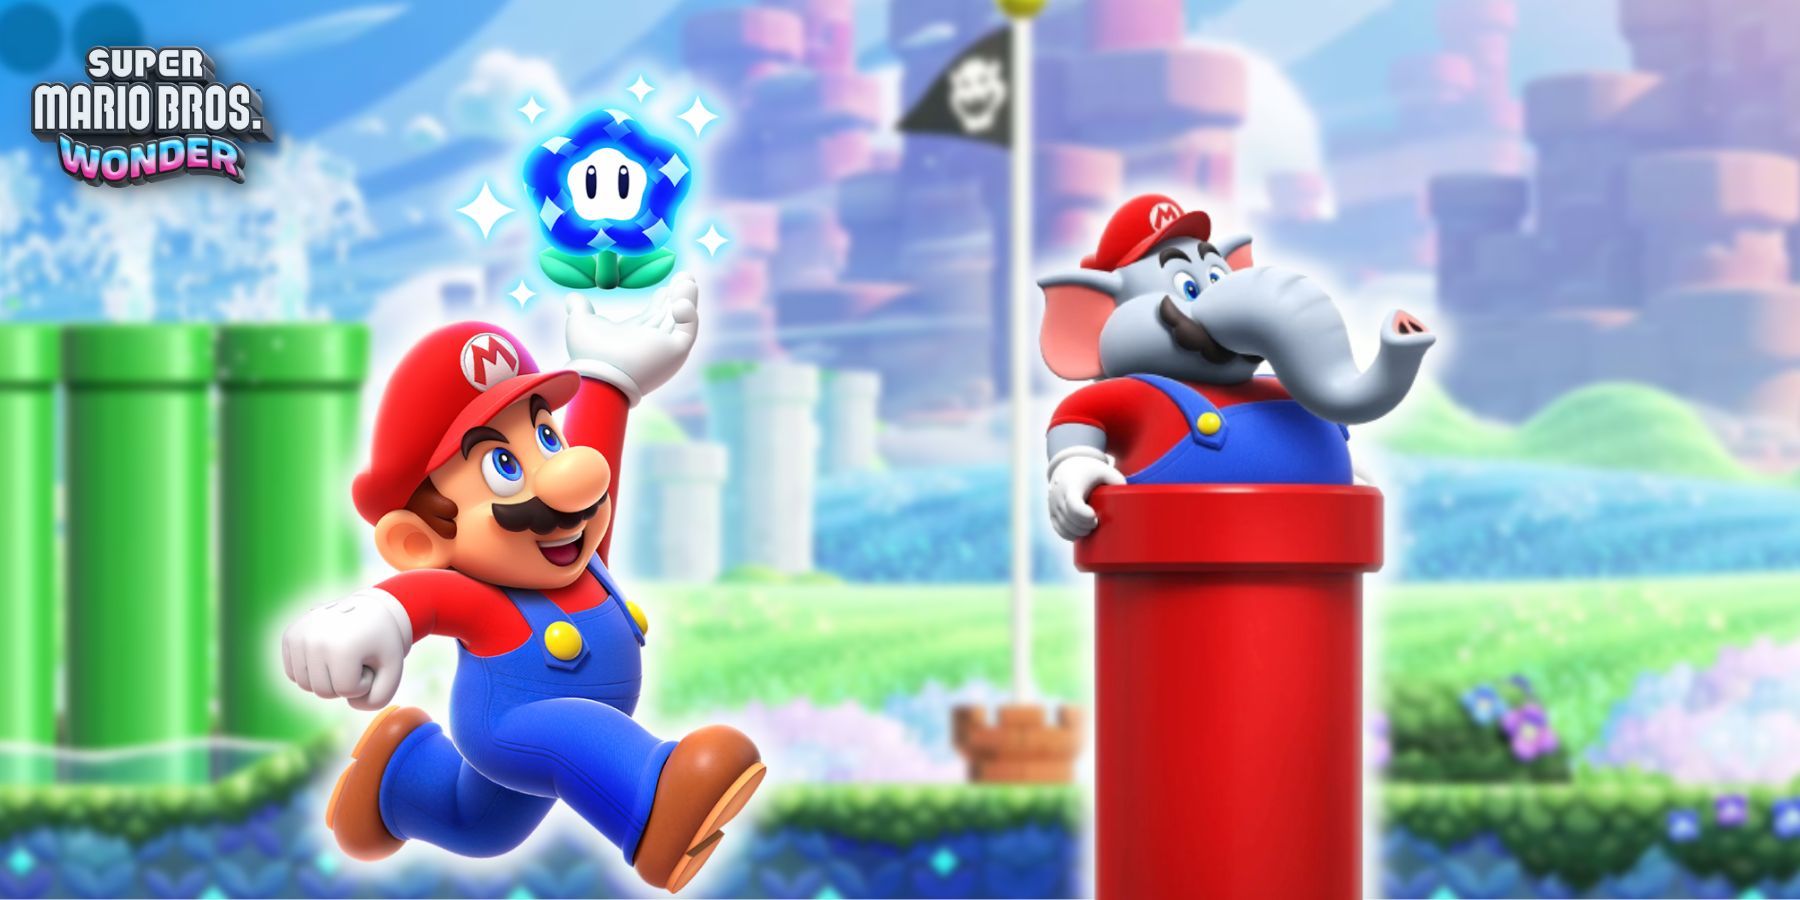 In Super Mario Bros. Wonder, New Power-Ups Really Pop - The New